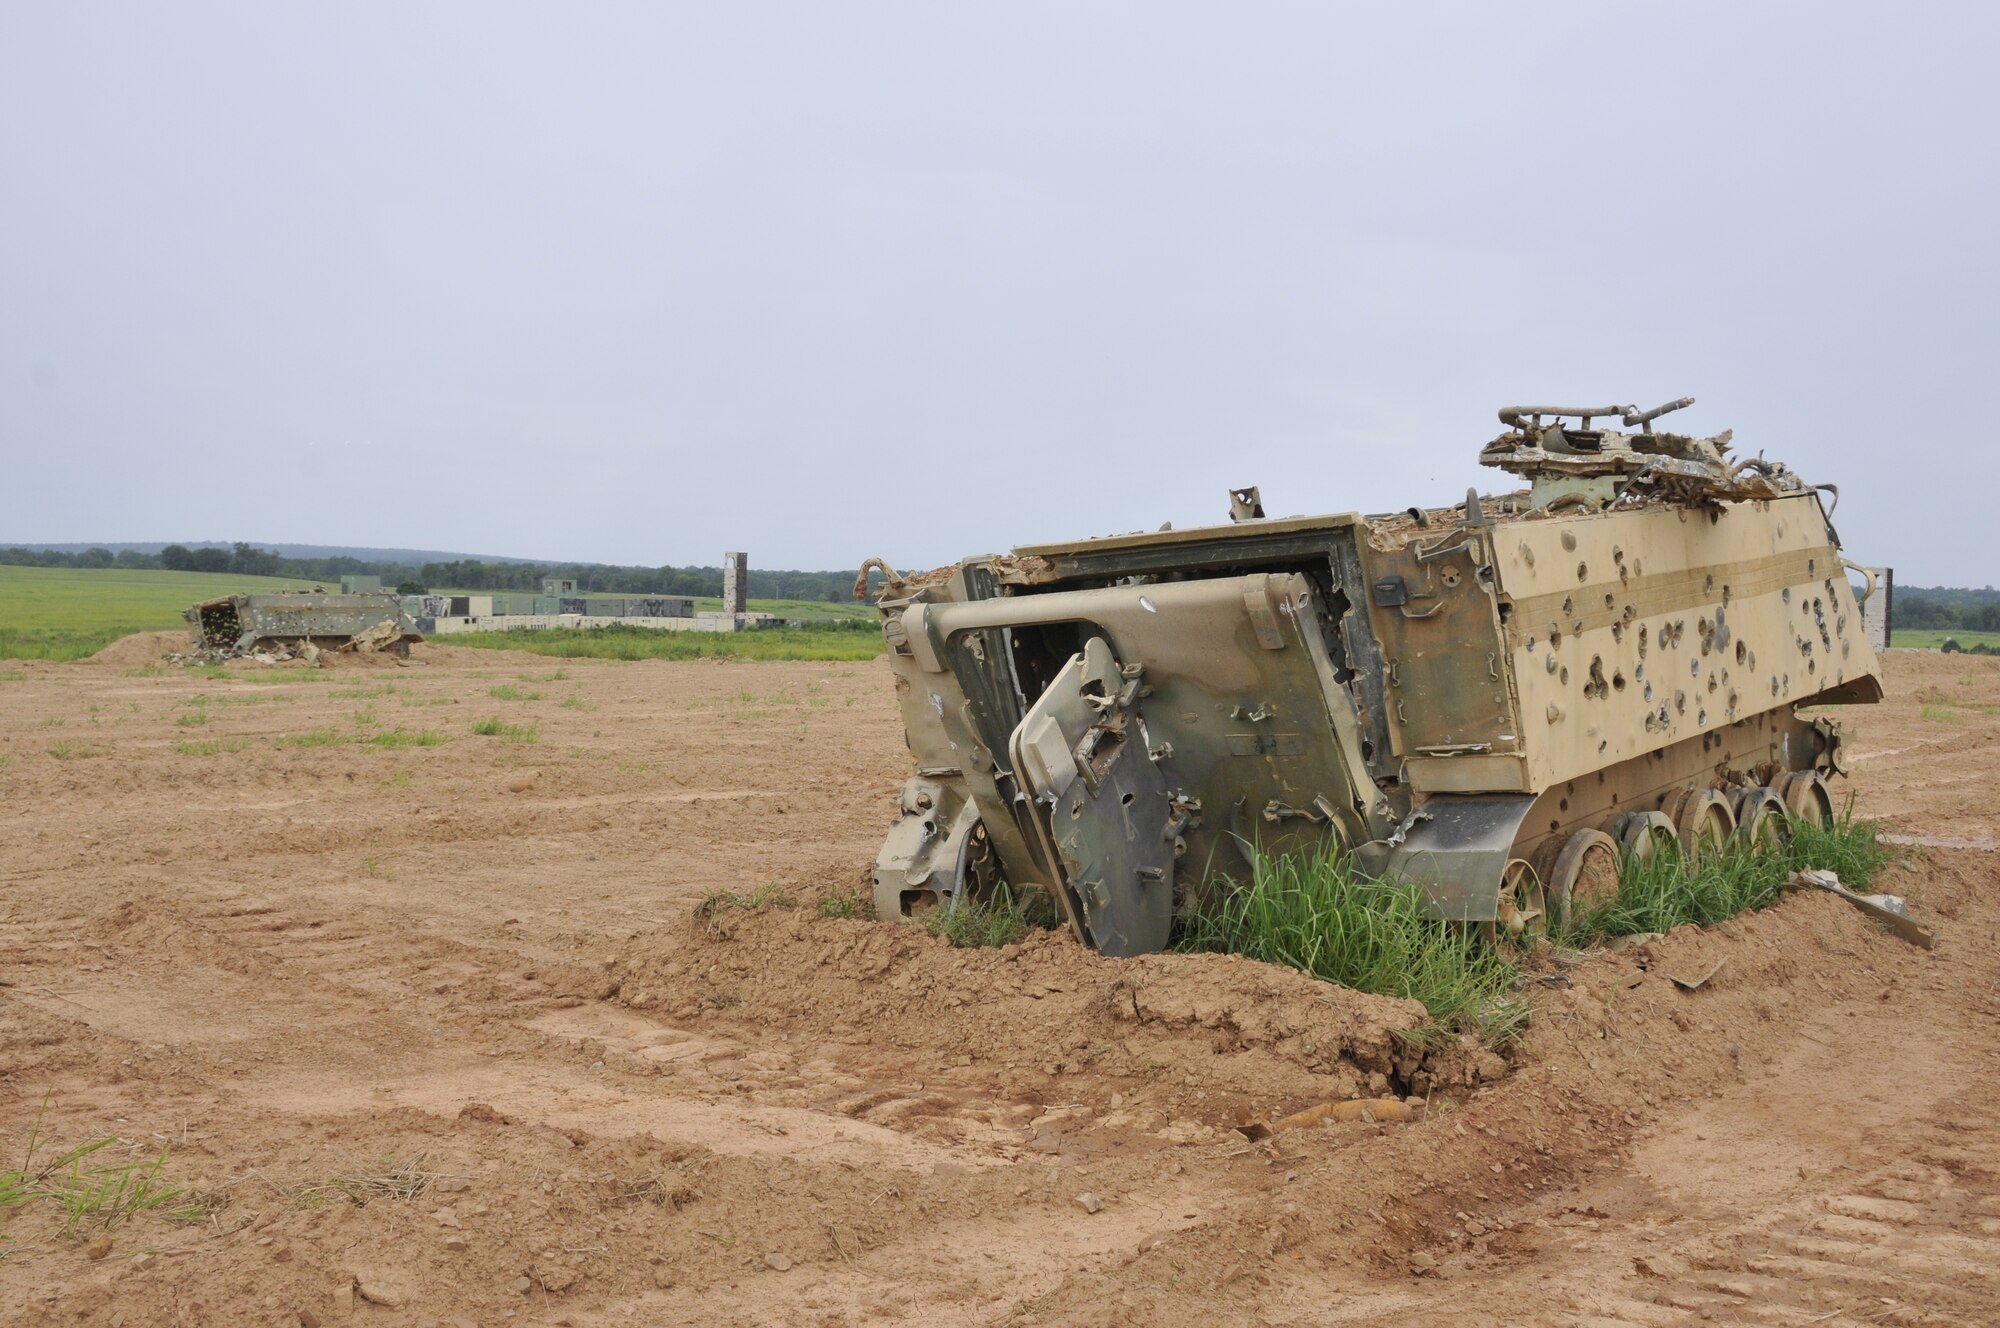 A US M-113 Armored Personnel Carrier sits at 188th Wing Detachment 1 Razorback Range at Fort Chaffee Maneuver Training Center, Arkansas, July 14, 2014. The range is maintained by the 188th and provides varying types of training to military units from around the world. (U.S. Air National Guard photo by Staff Sgt. John Suleski/released)